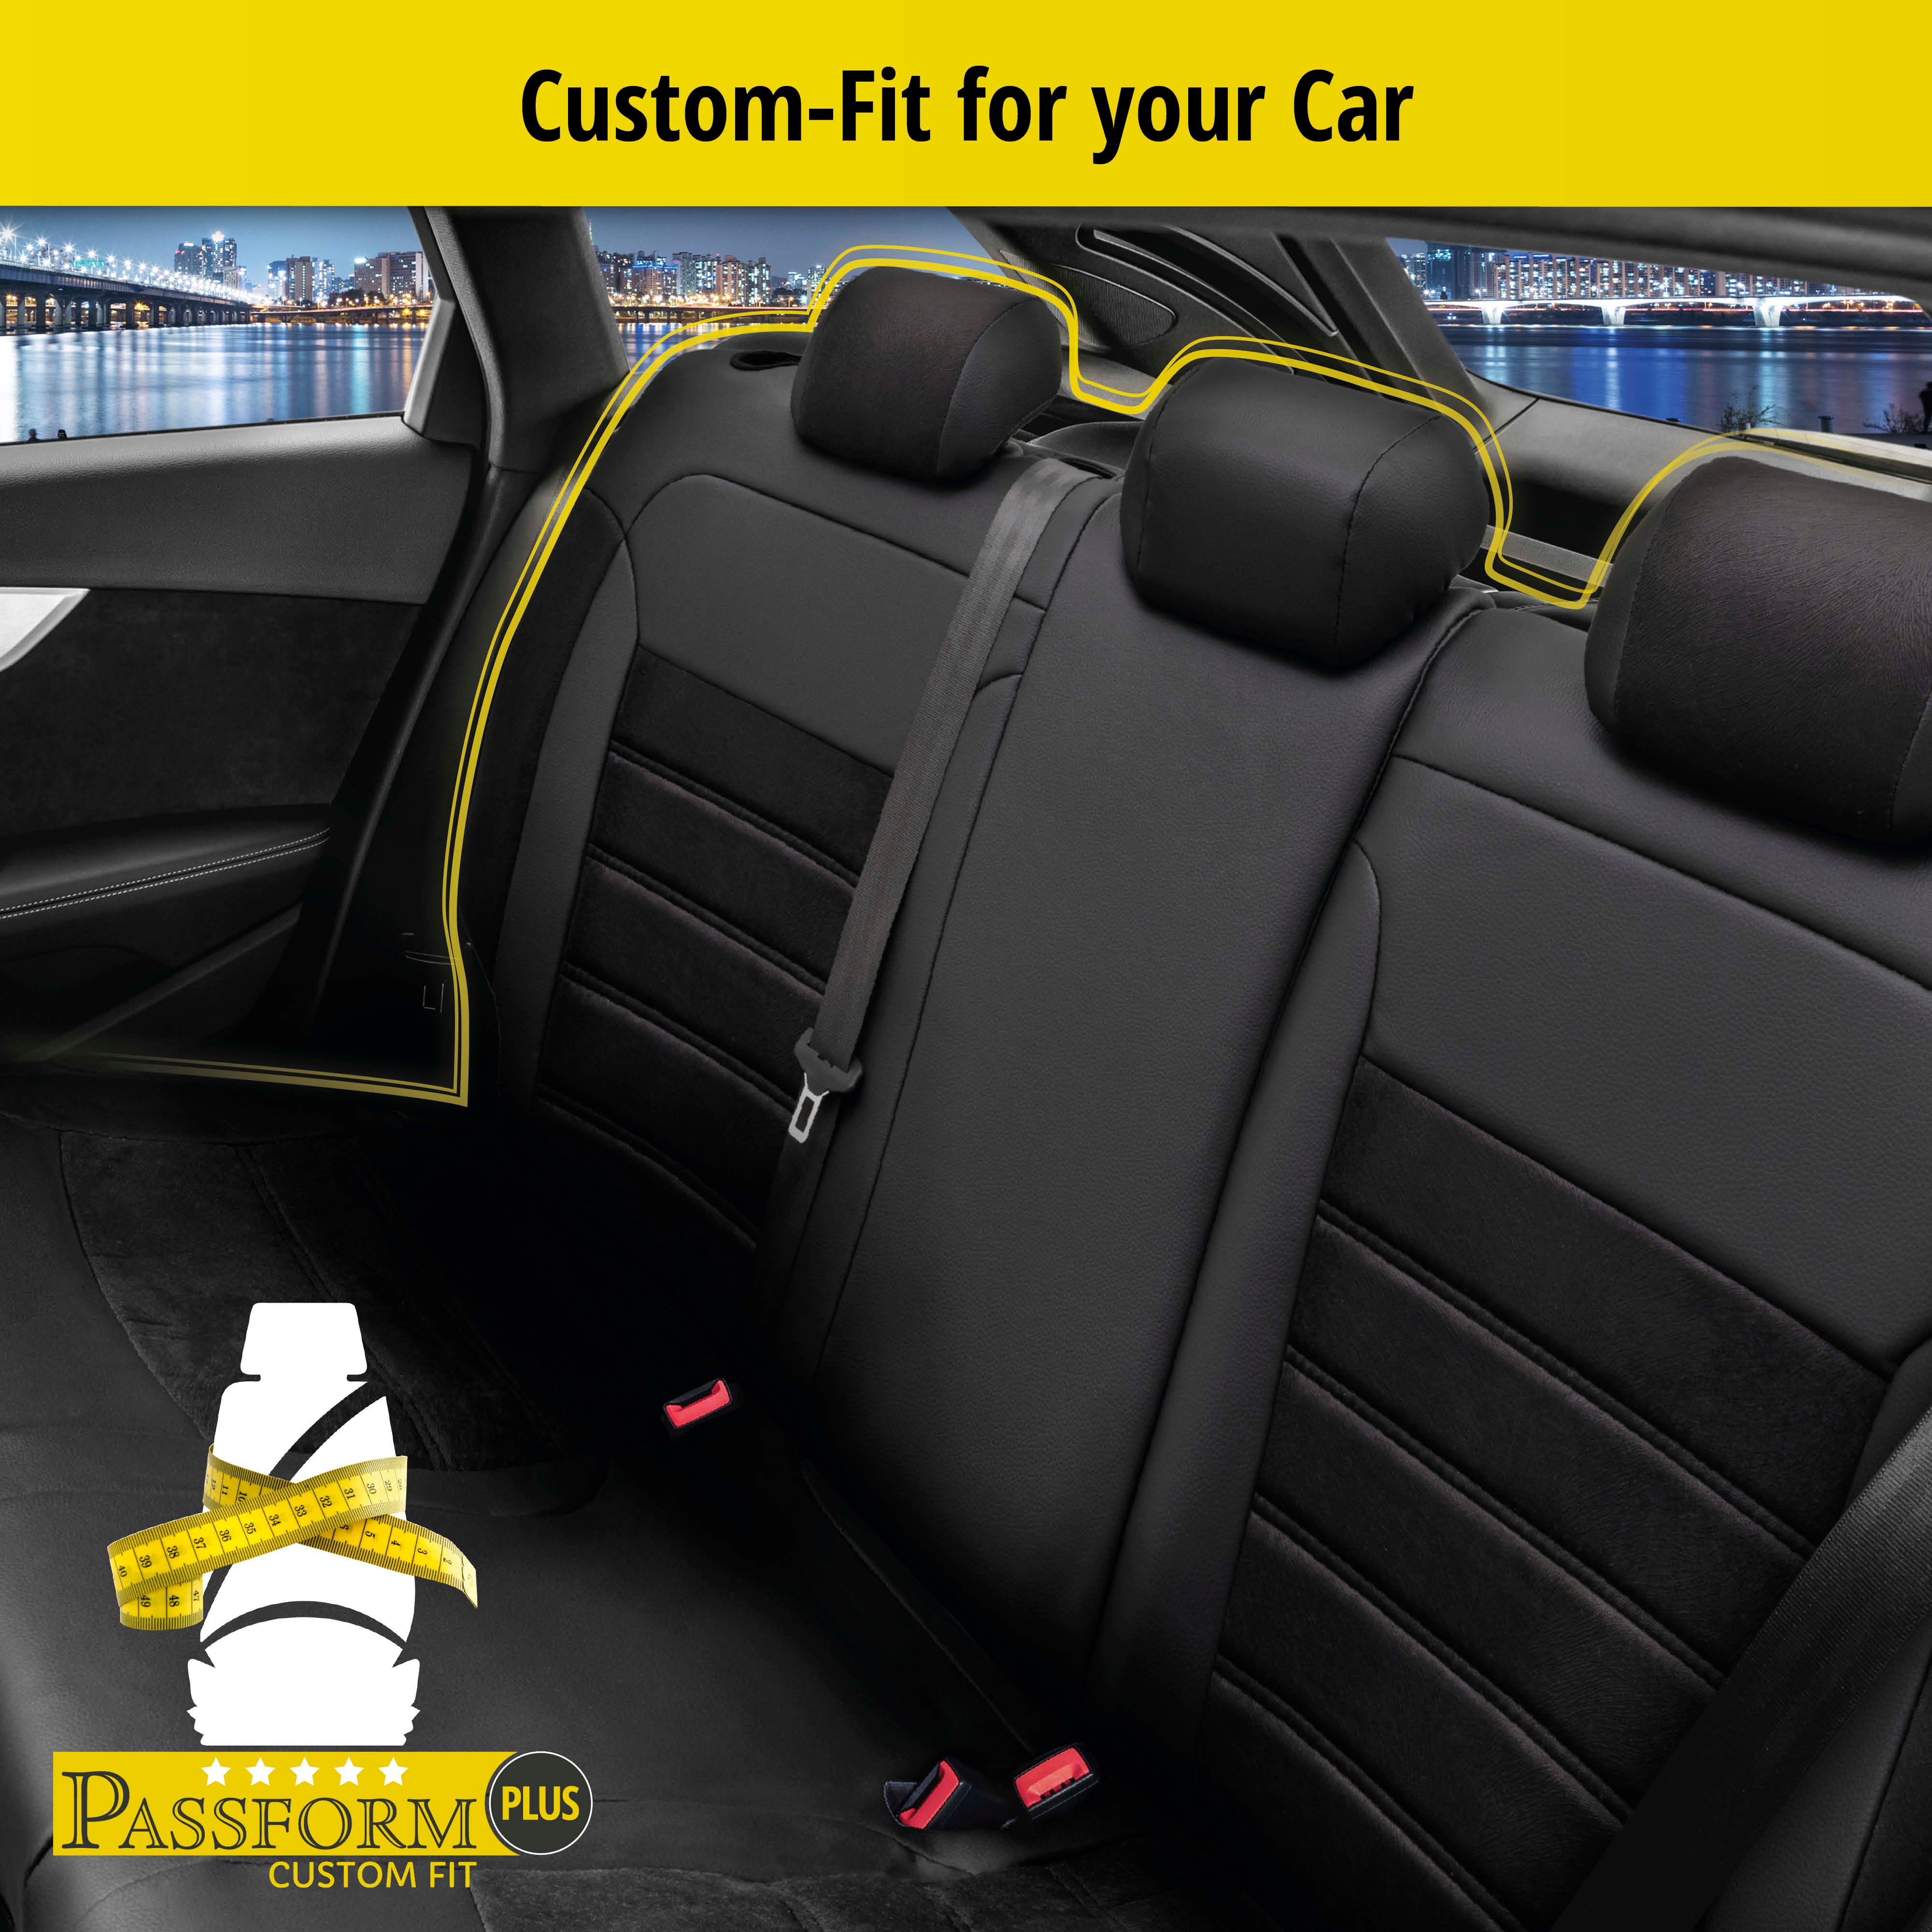 Seat Cover Bari for Mercedes-Benz C-Class 2015-Today, 1 rear seat cover for normal seats